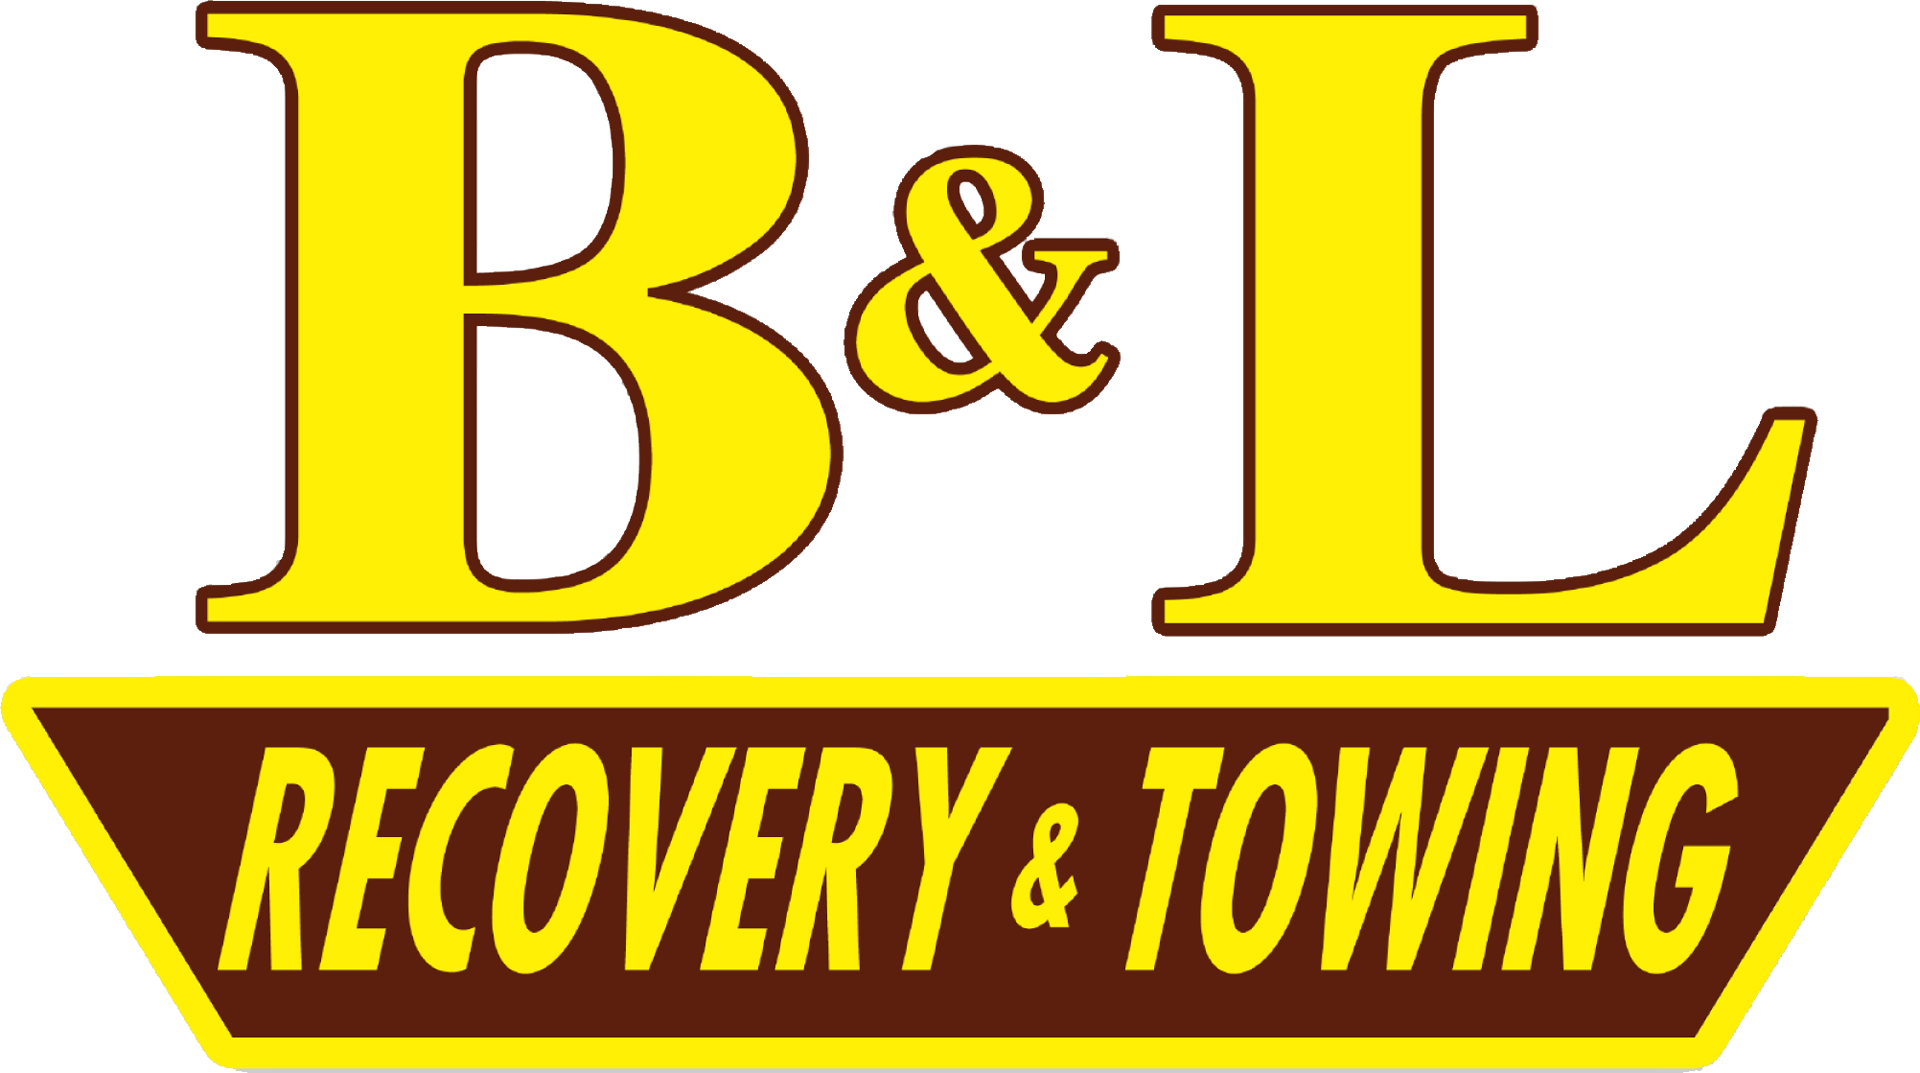 B and L Towing